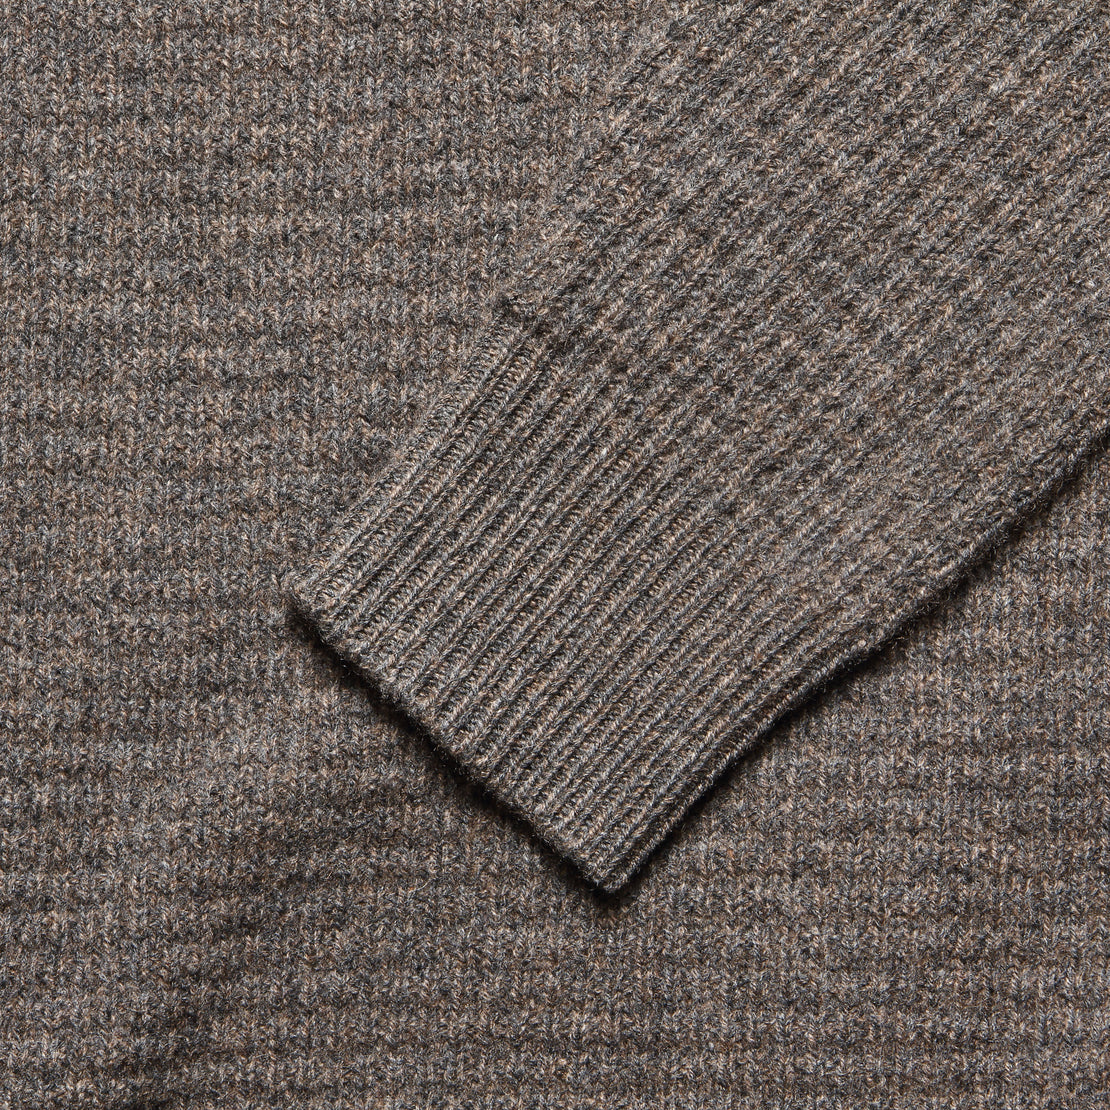 Cashmere Crewneck - Walnut - Faherty - STAG Provisions - Tops - Sweater